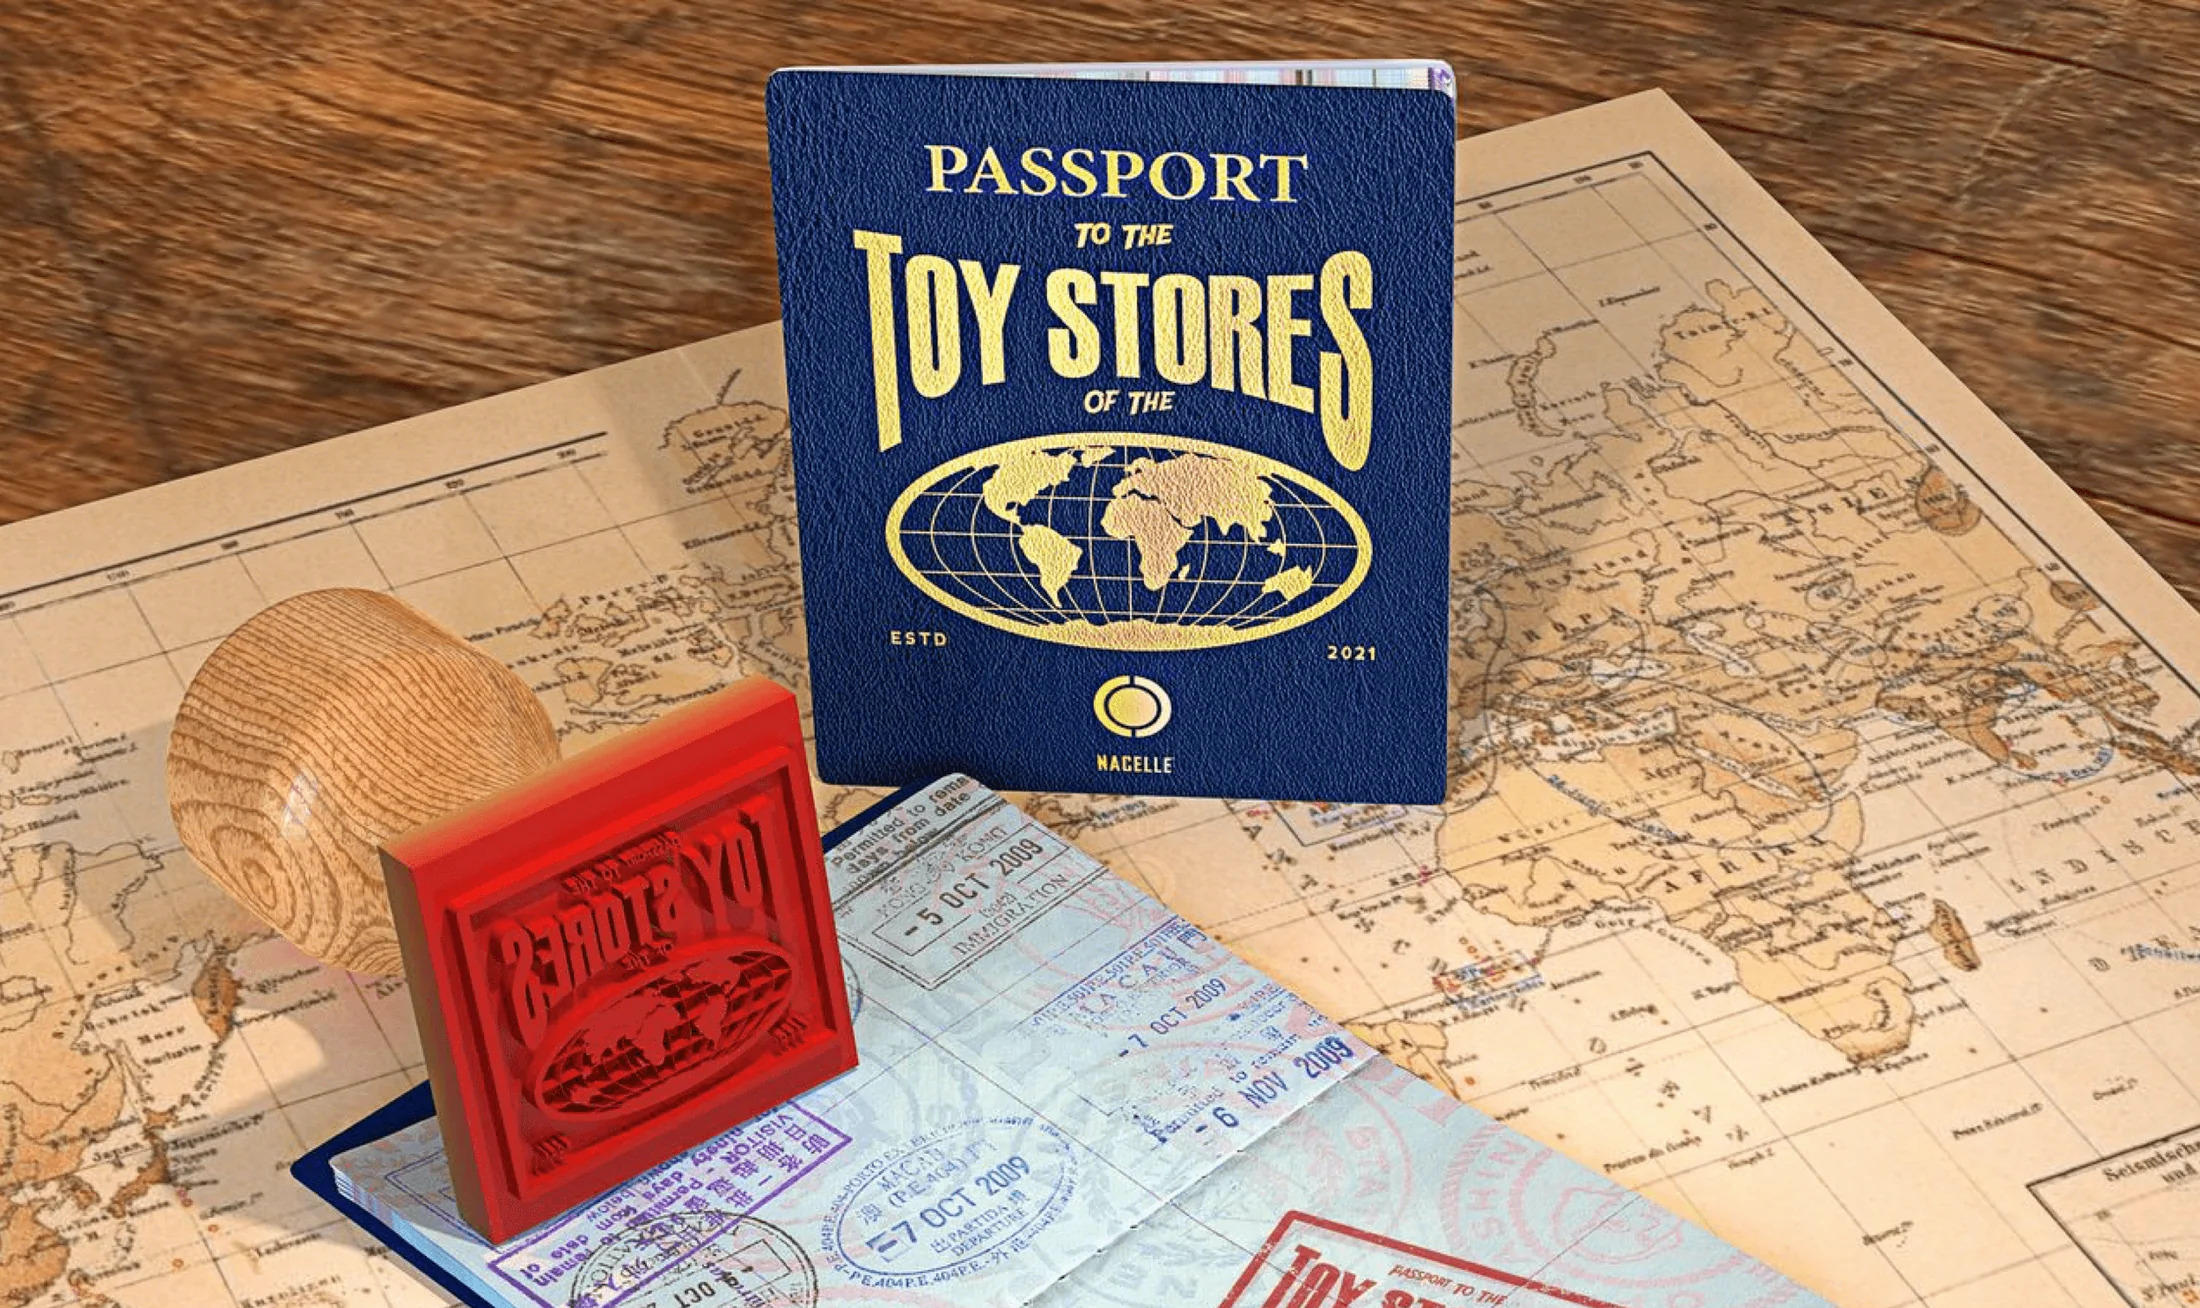 nacelle-toy-stores-of-the-world-passport